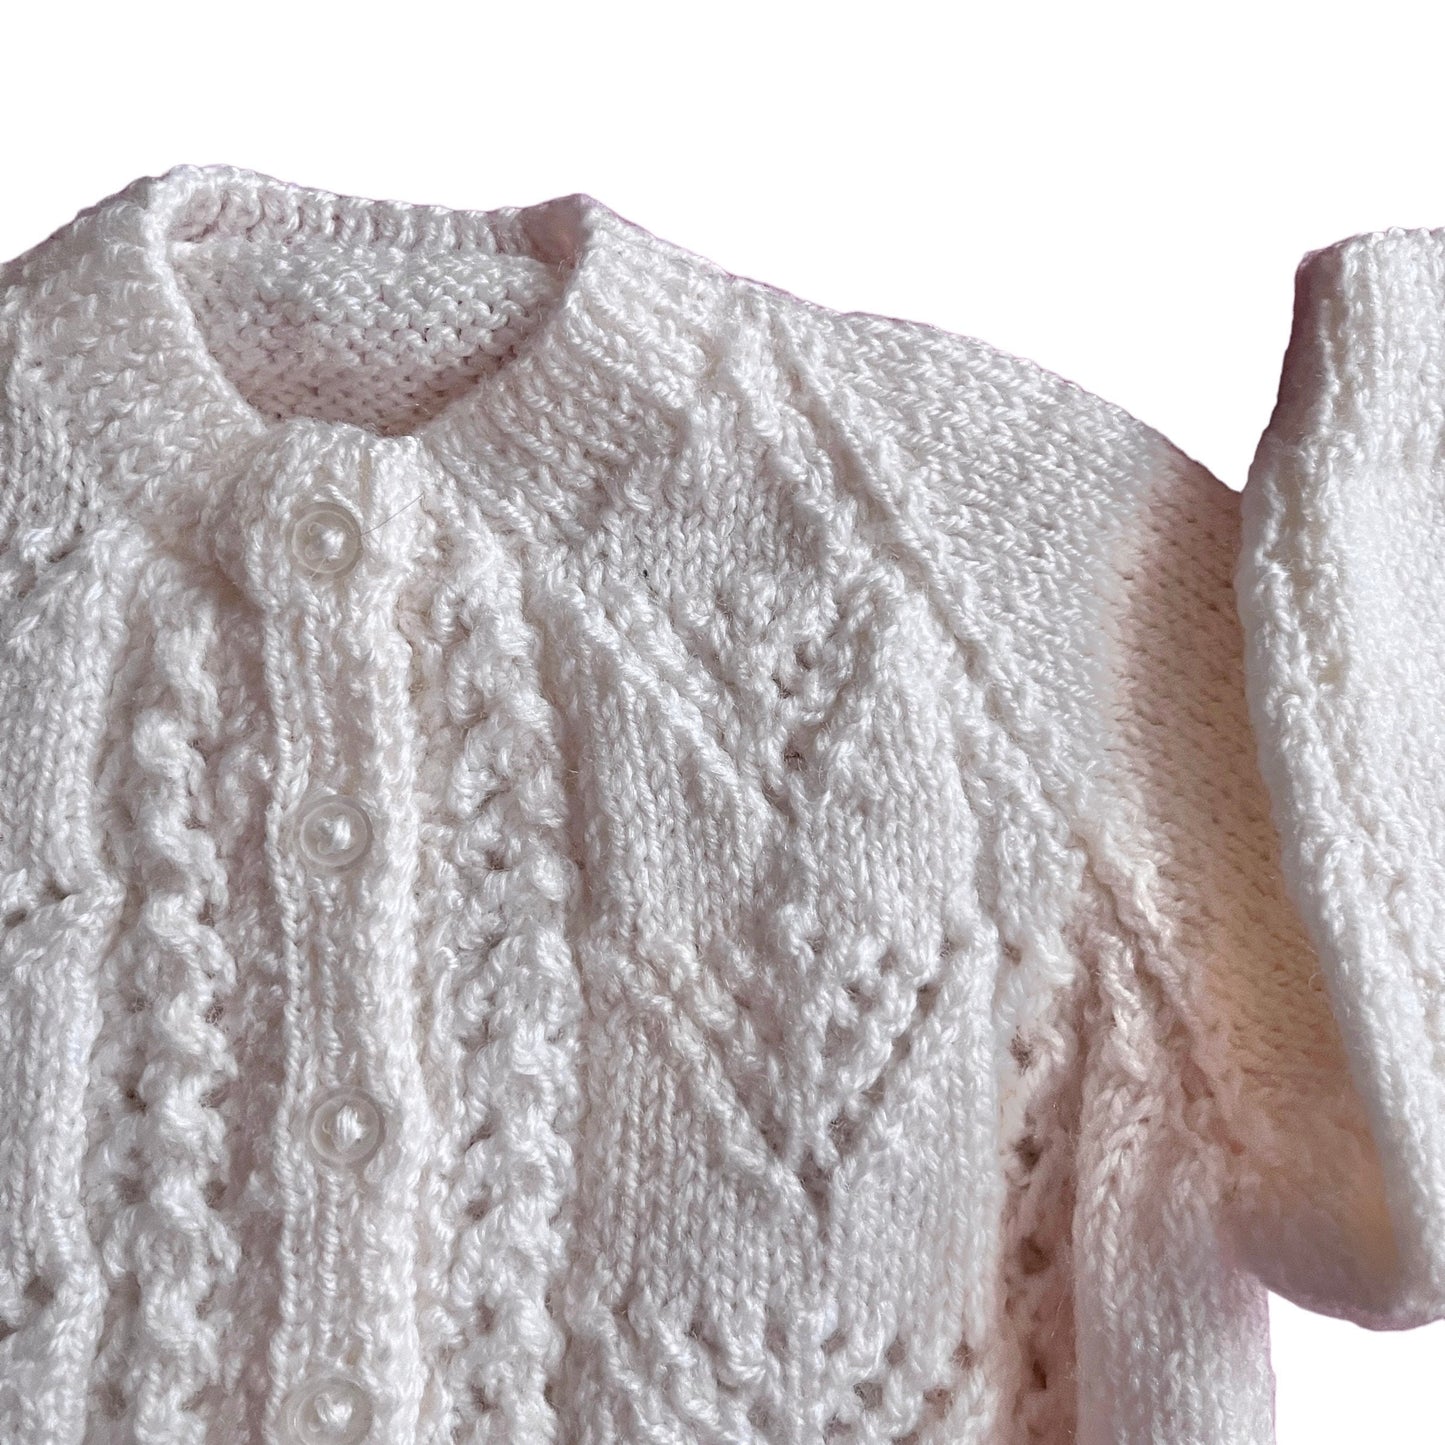 Vintage White Knitted Cardigan 0-6 Months